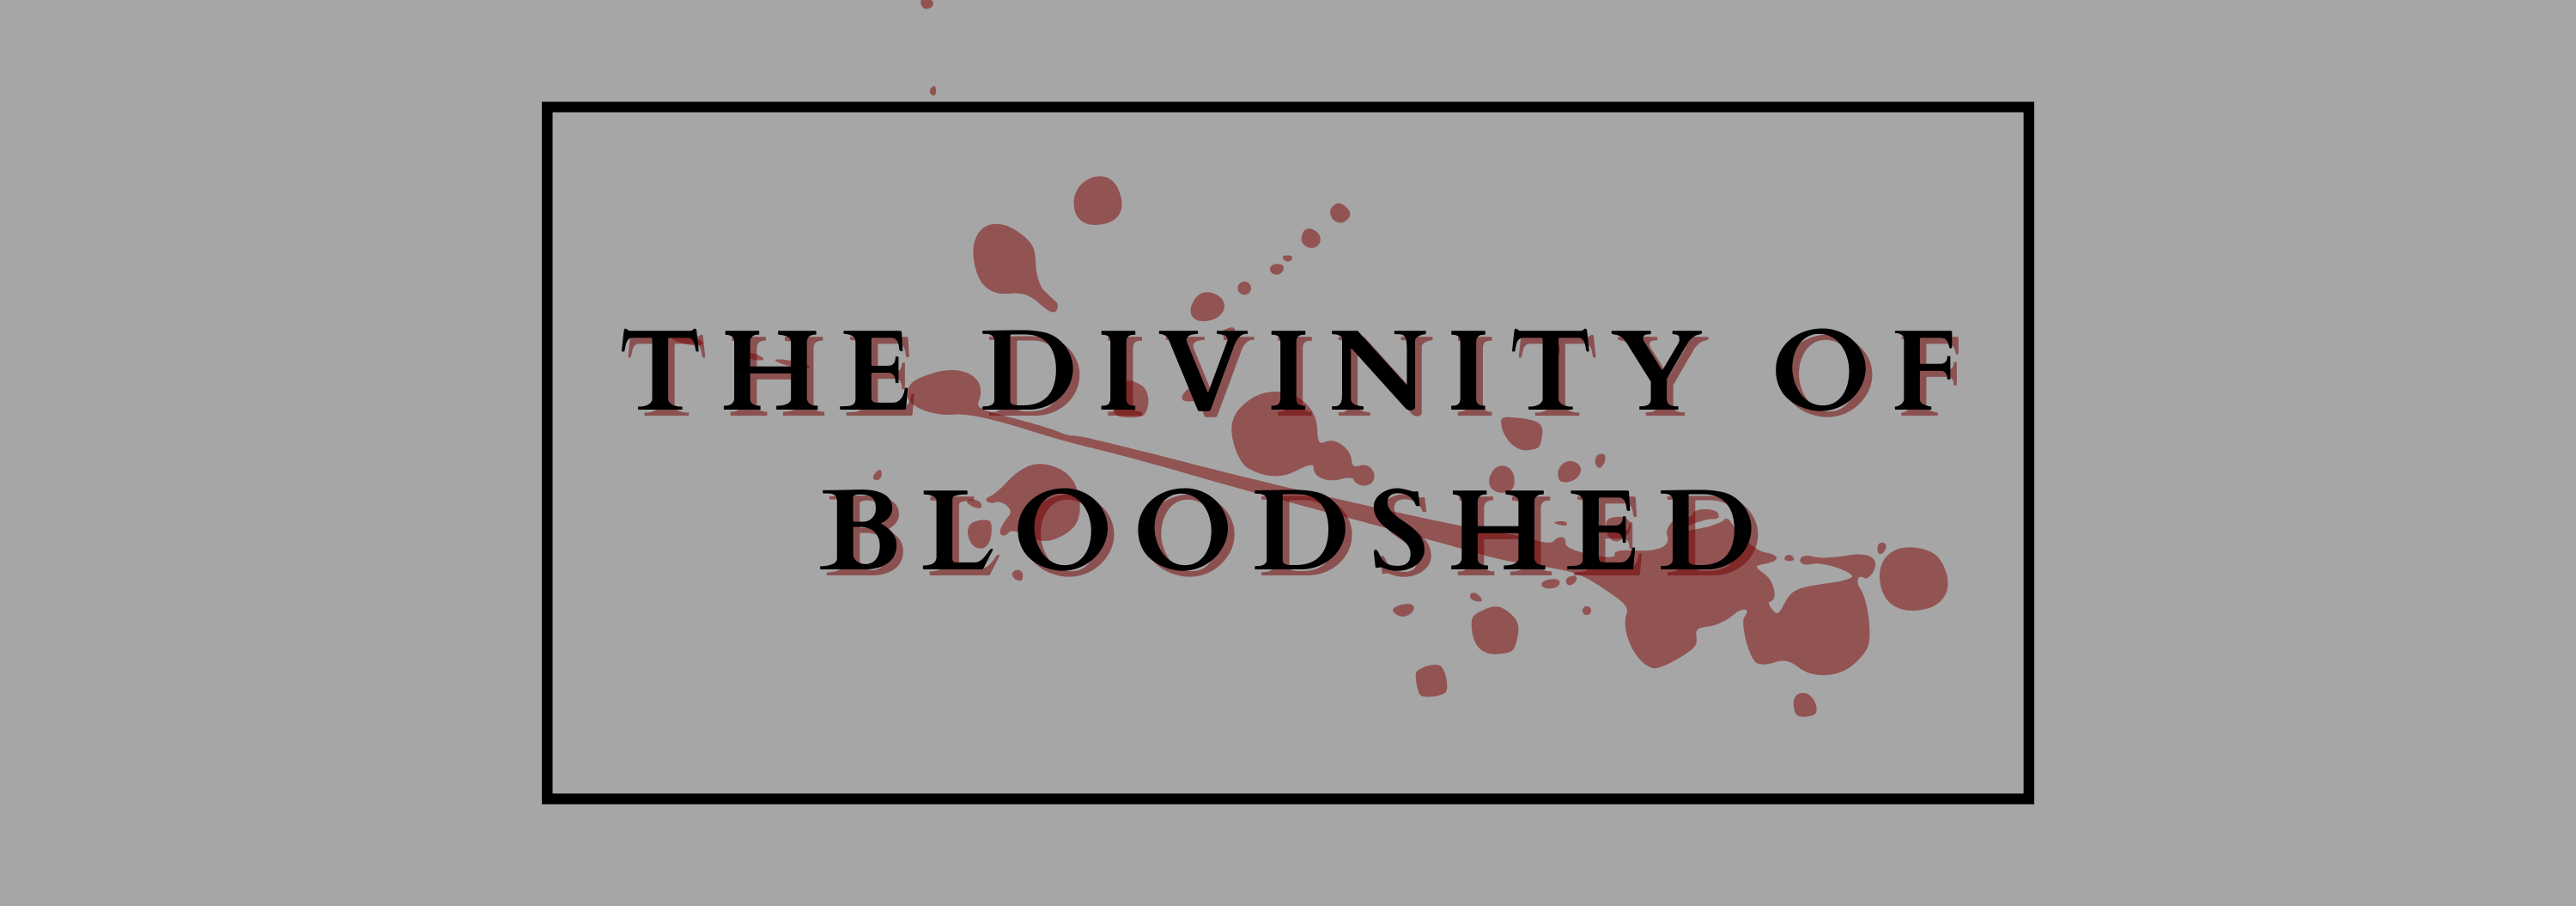 The Divinity of Bloodshed